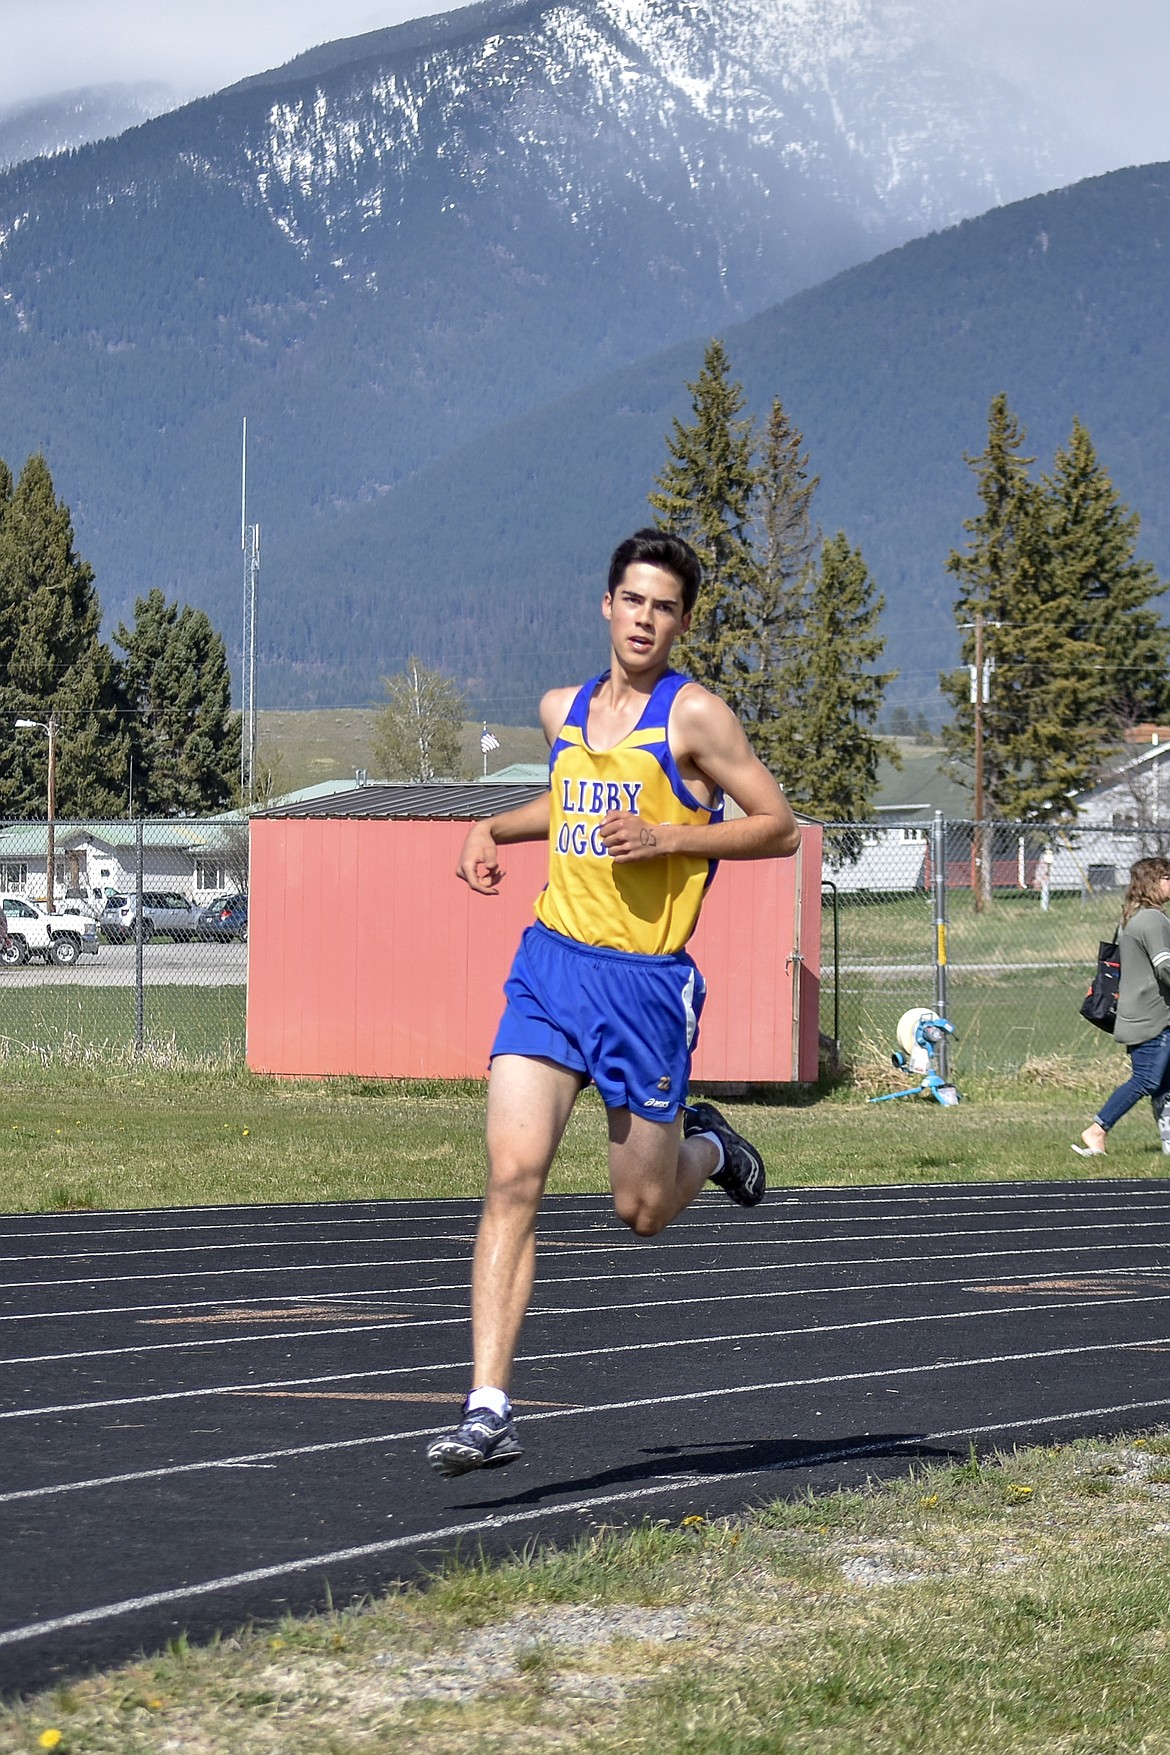 Libby sophomore John Cheroske competes in the 1,600m run at the Lincoln County Track Meet Tuesday. Cheroske ran a personal record time of 5:08.94. (Benjamin Kibbey/The Western News)